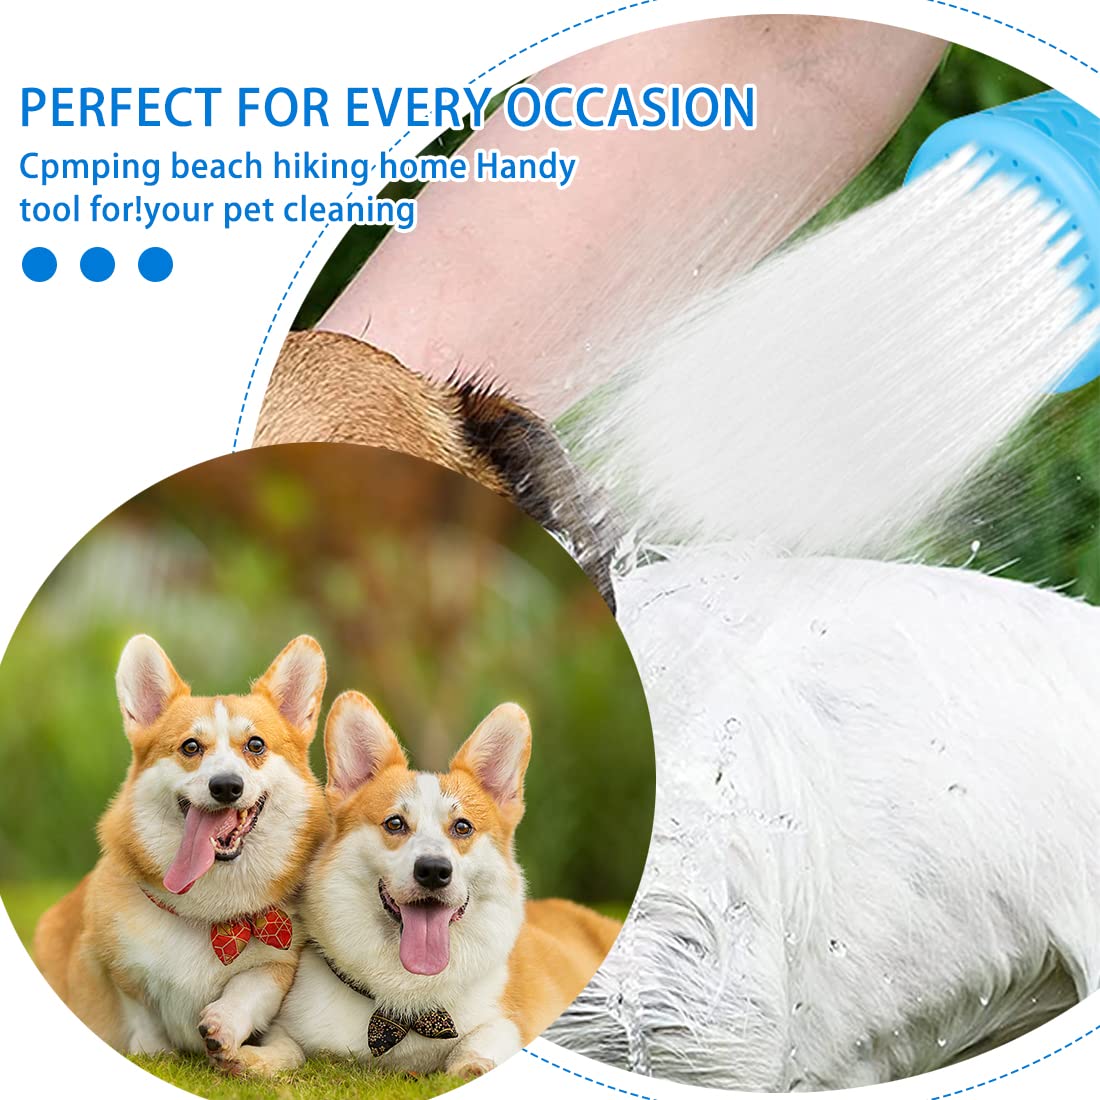 Pet Silicone Bath Shower Sprayer for Dogs Portable Pets Bathing Shower Sprayers Accessory Head Attachment Bath Tool for Outdoor Hiking Camping Dirt Removing 2PCS